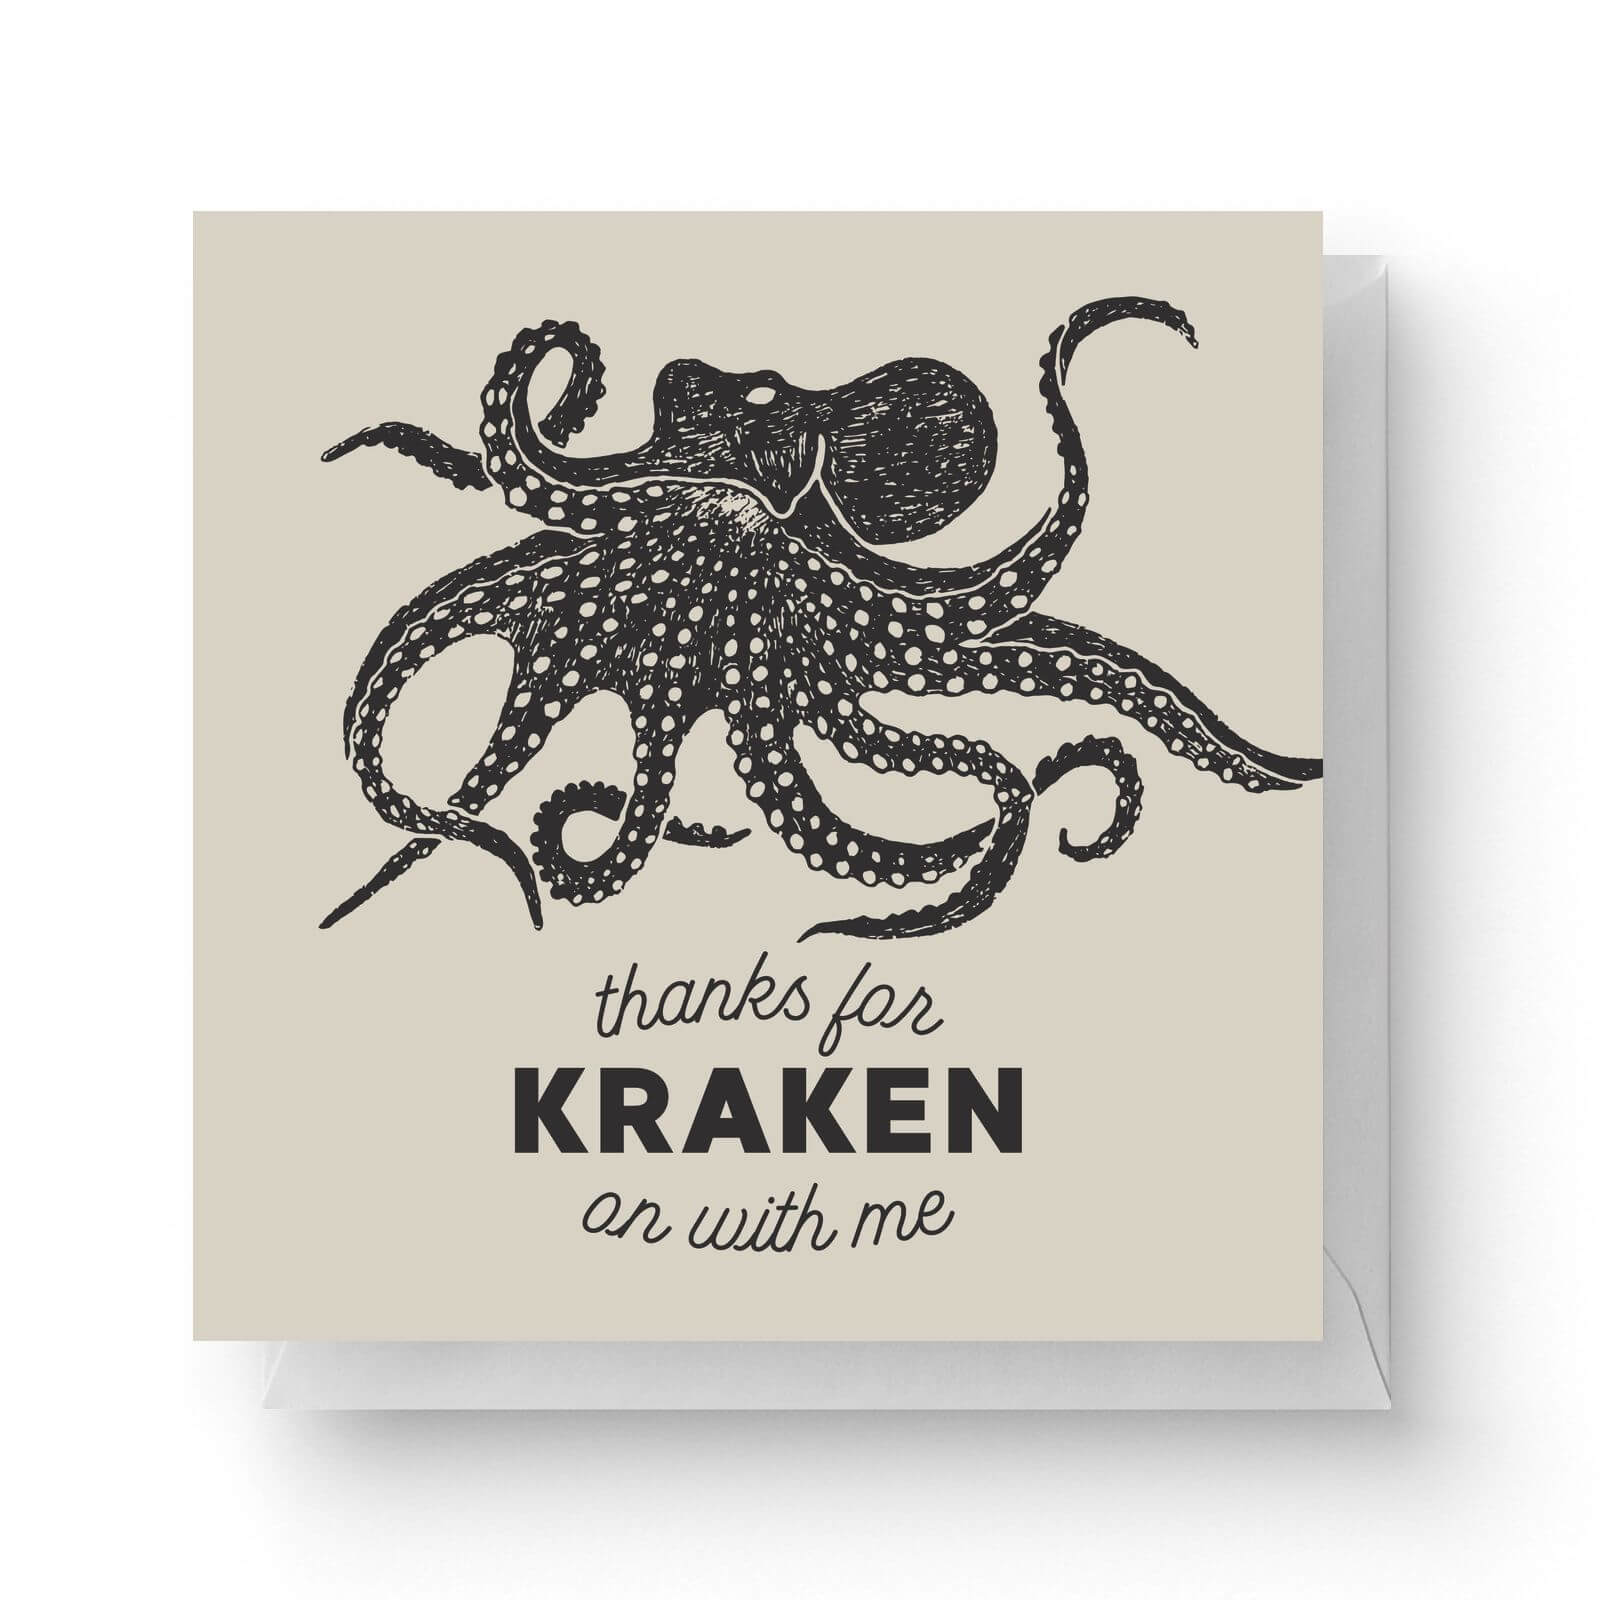 Thanks For Kraken On With Me Square Greetings Card 148cm X 148cm